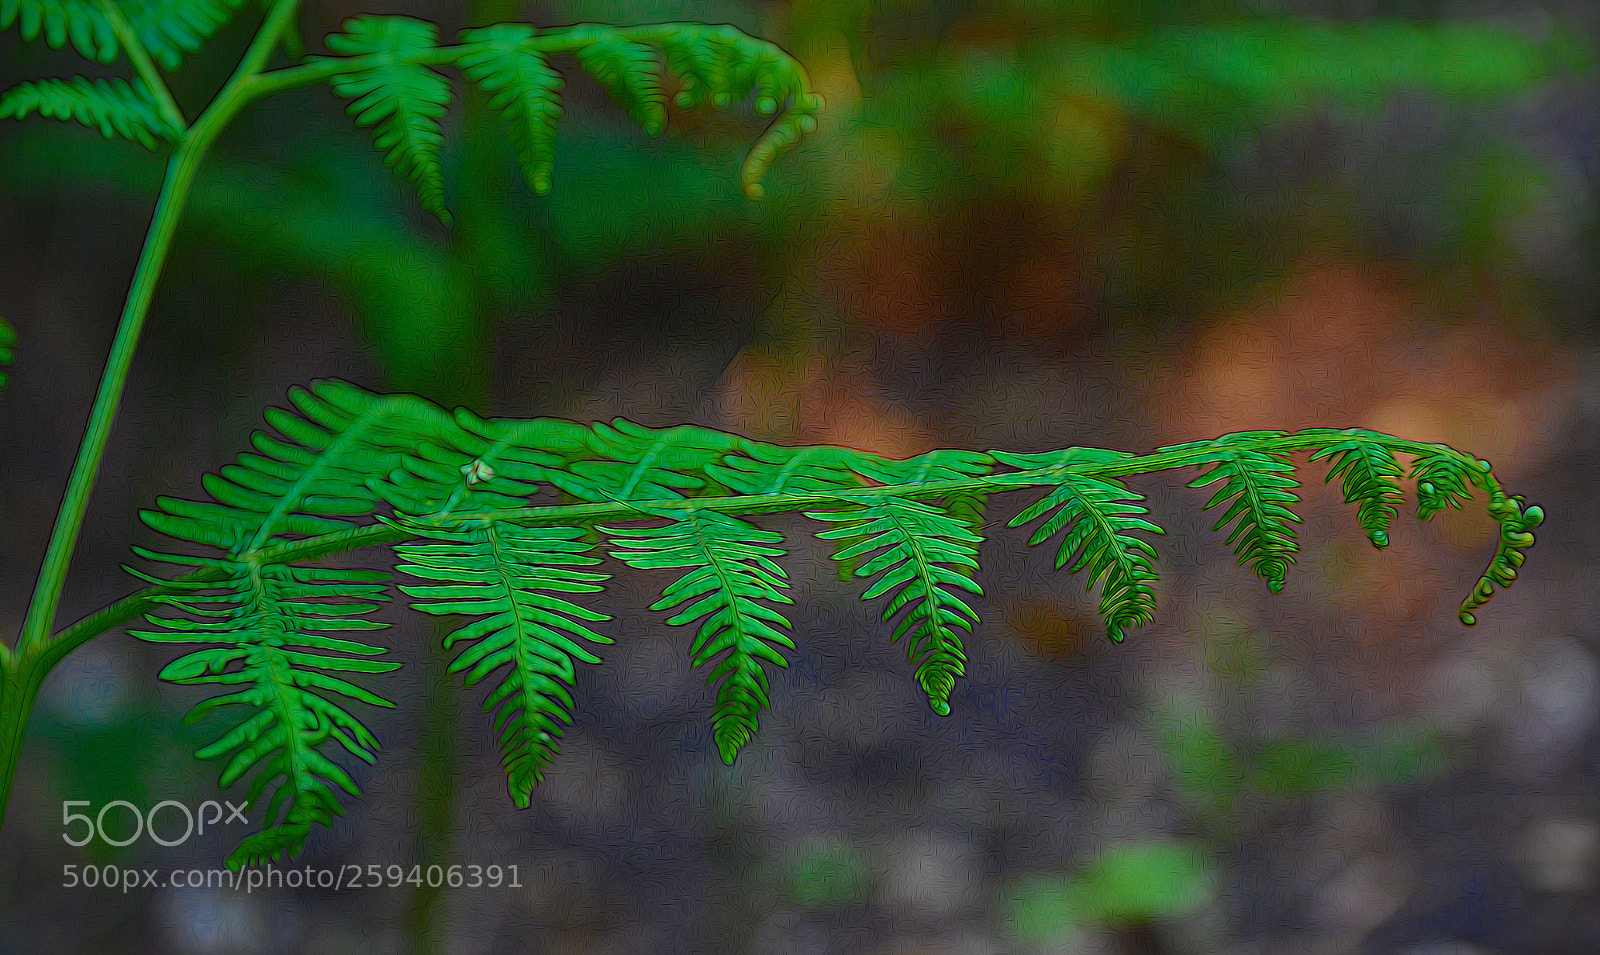 Nikon D7000 sample photo. Fern with effects photography